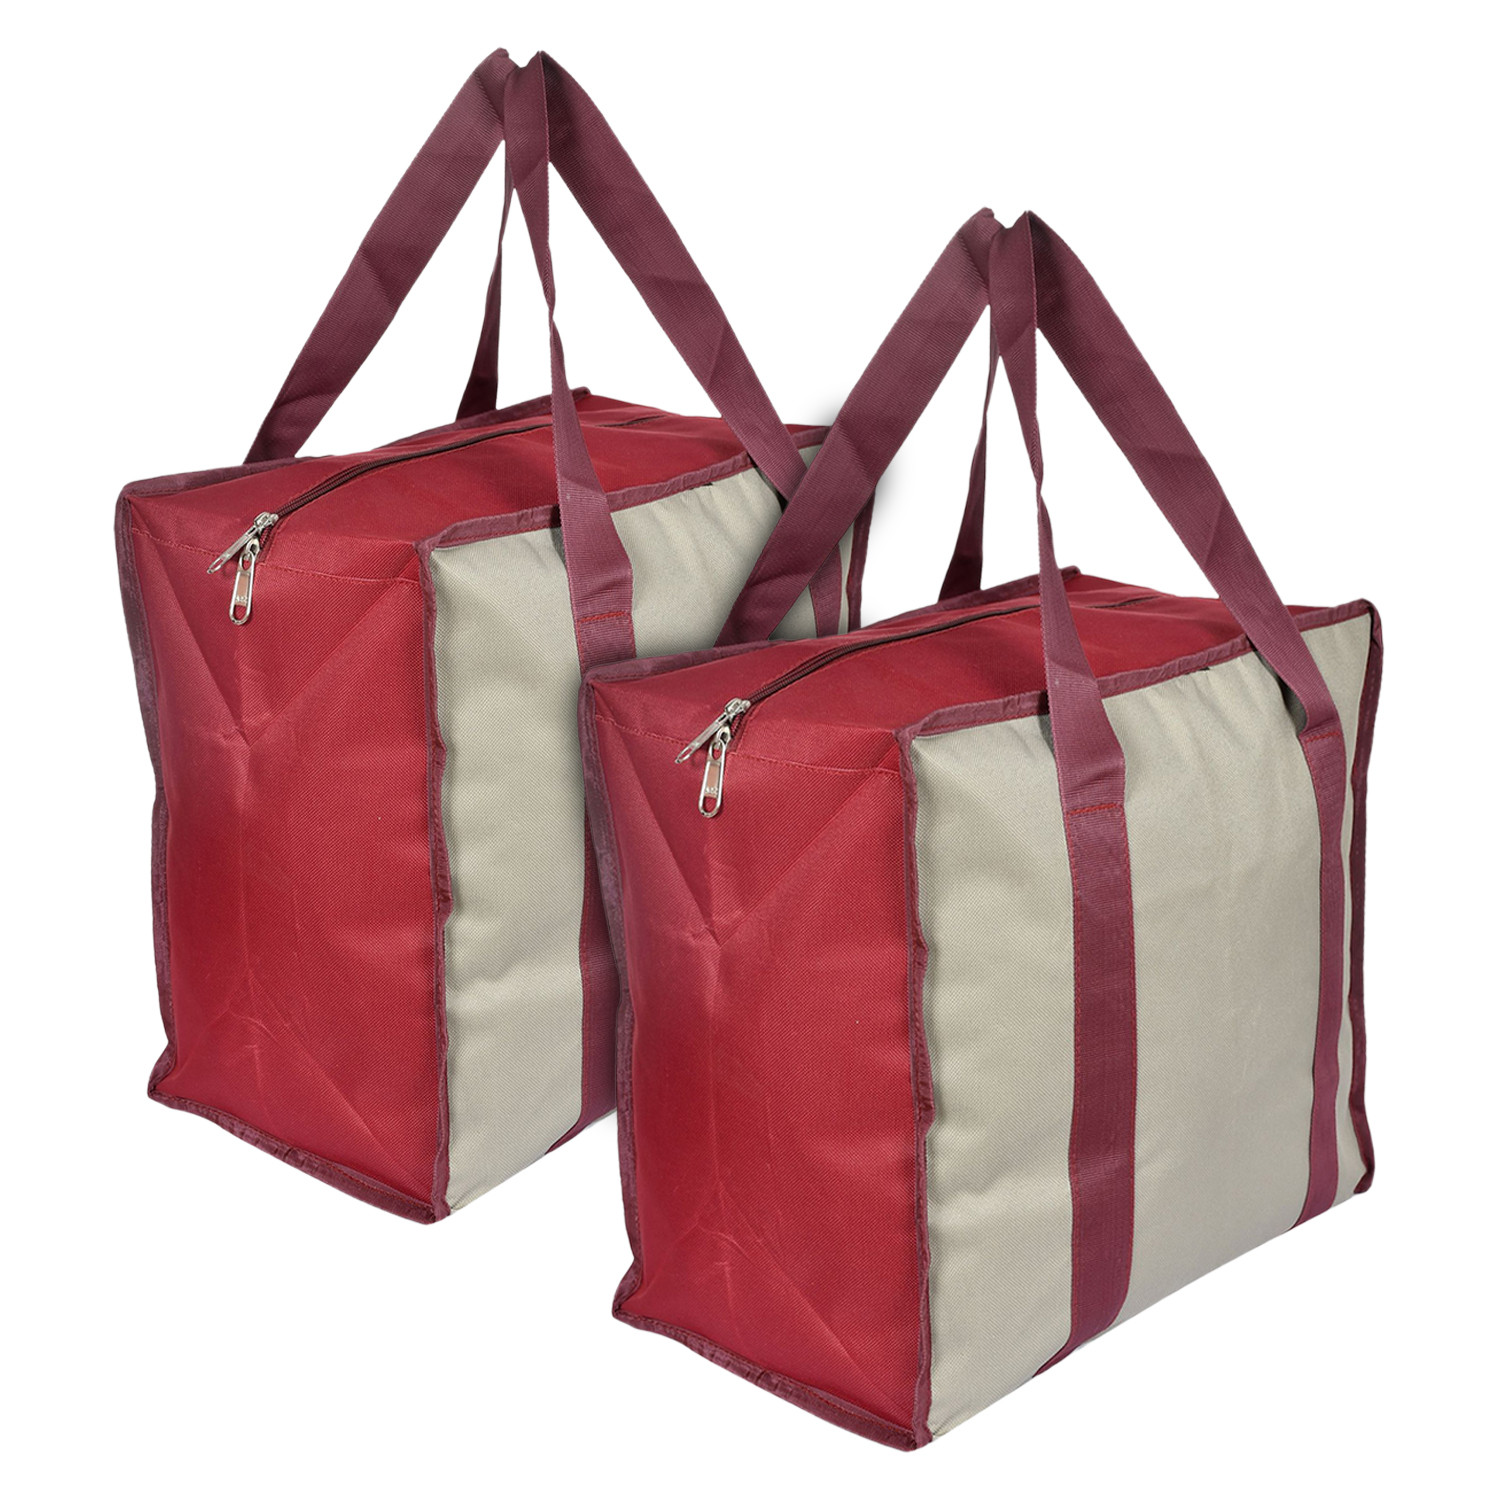 Kuber Industries Rexine Shopping Bags/Grocery Bag for Carry Grocery, Fruits, Vegetable with Handles (Beige) 54KM4019